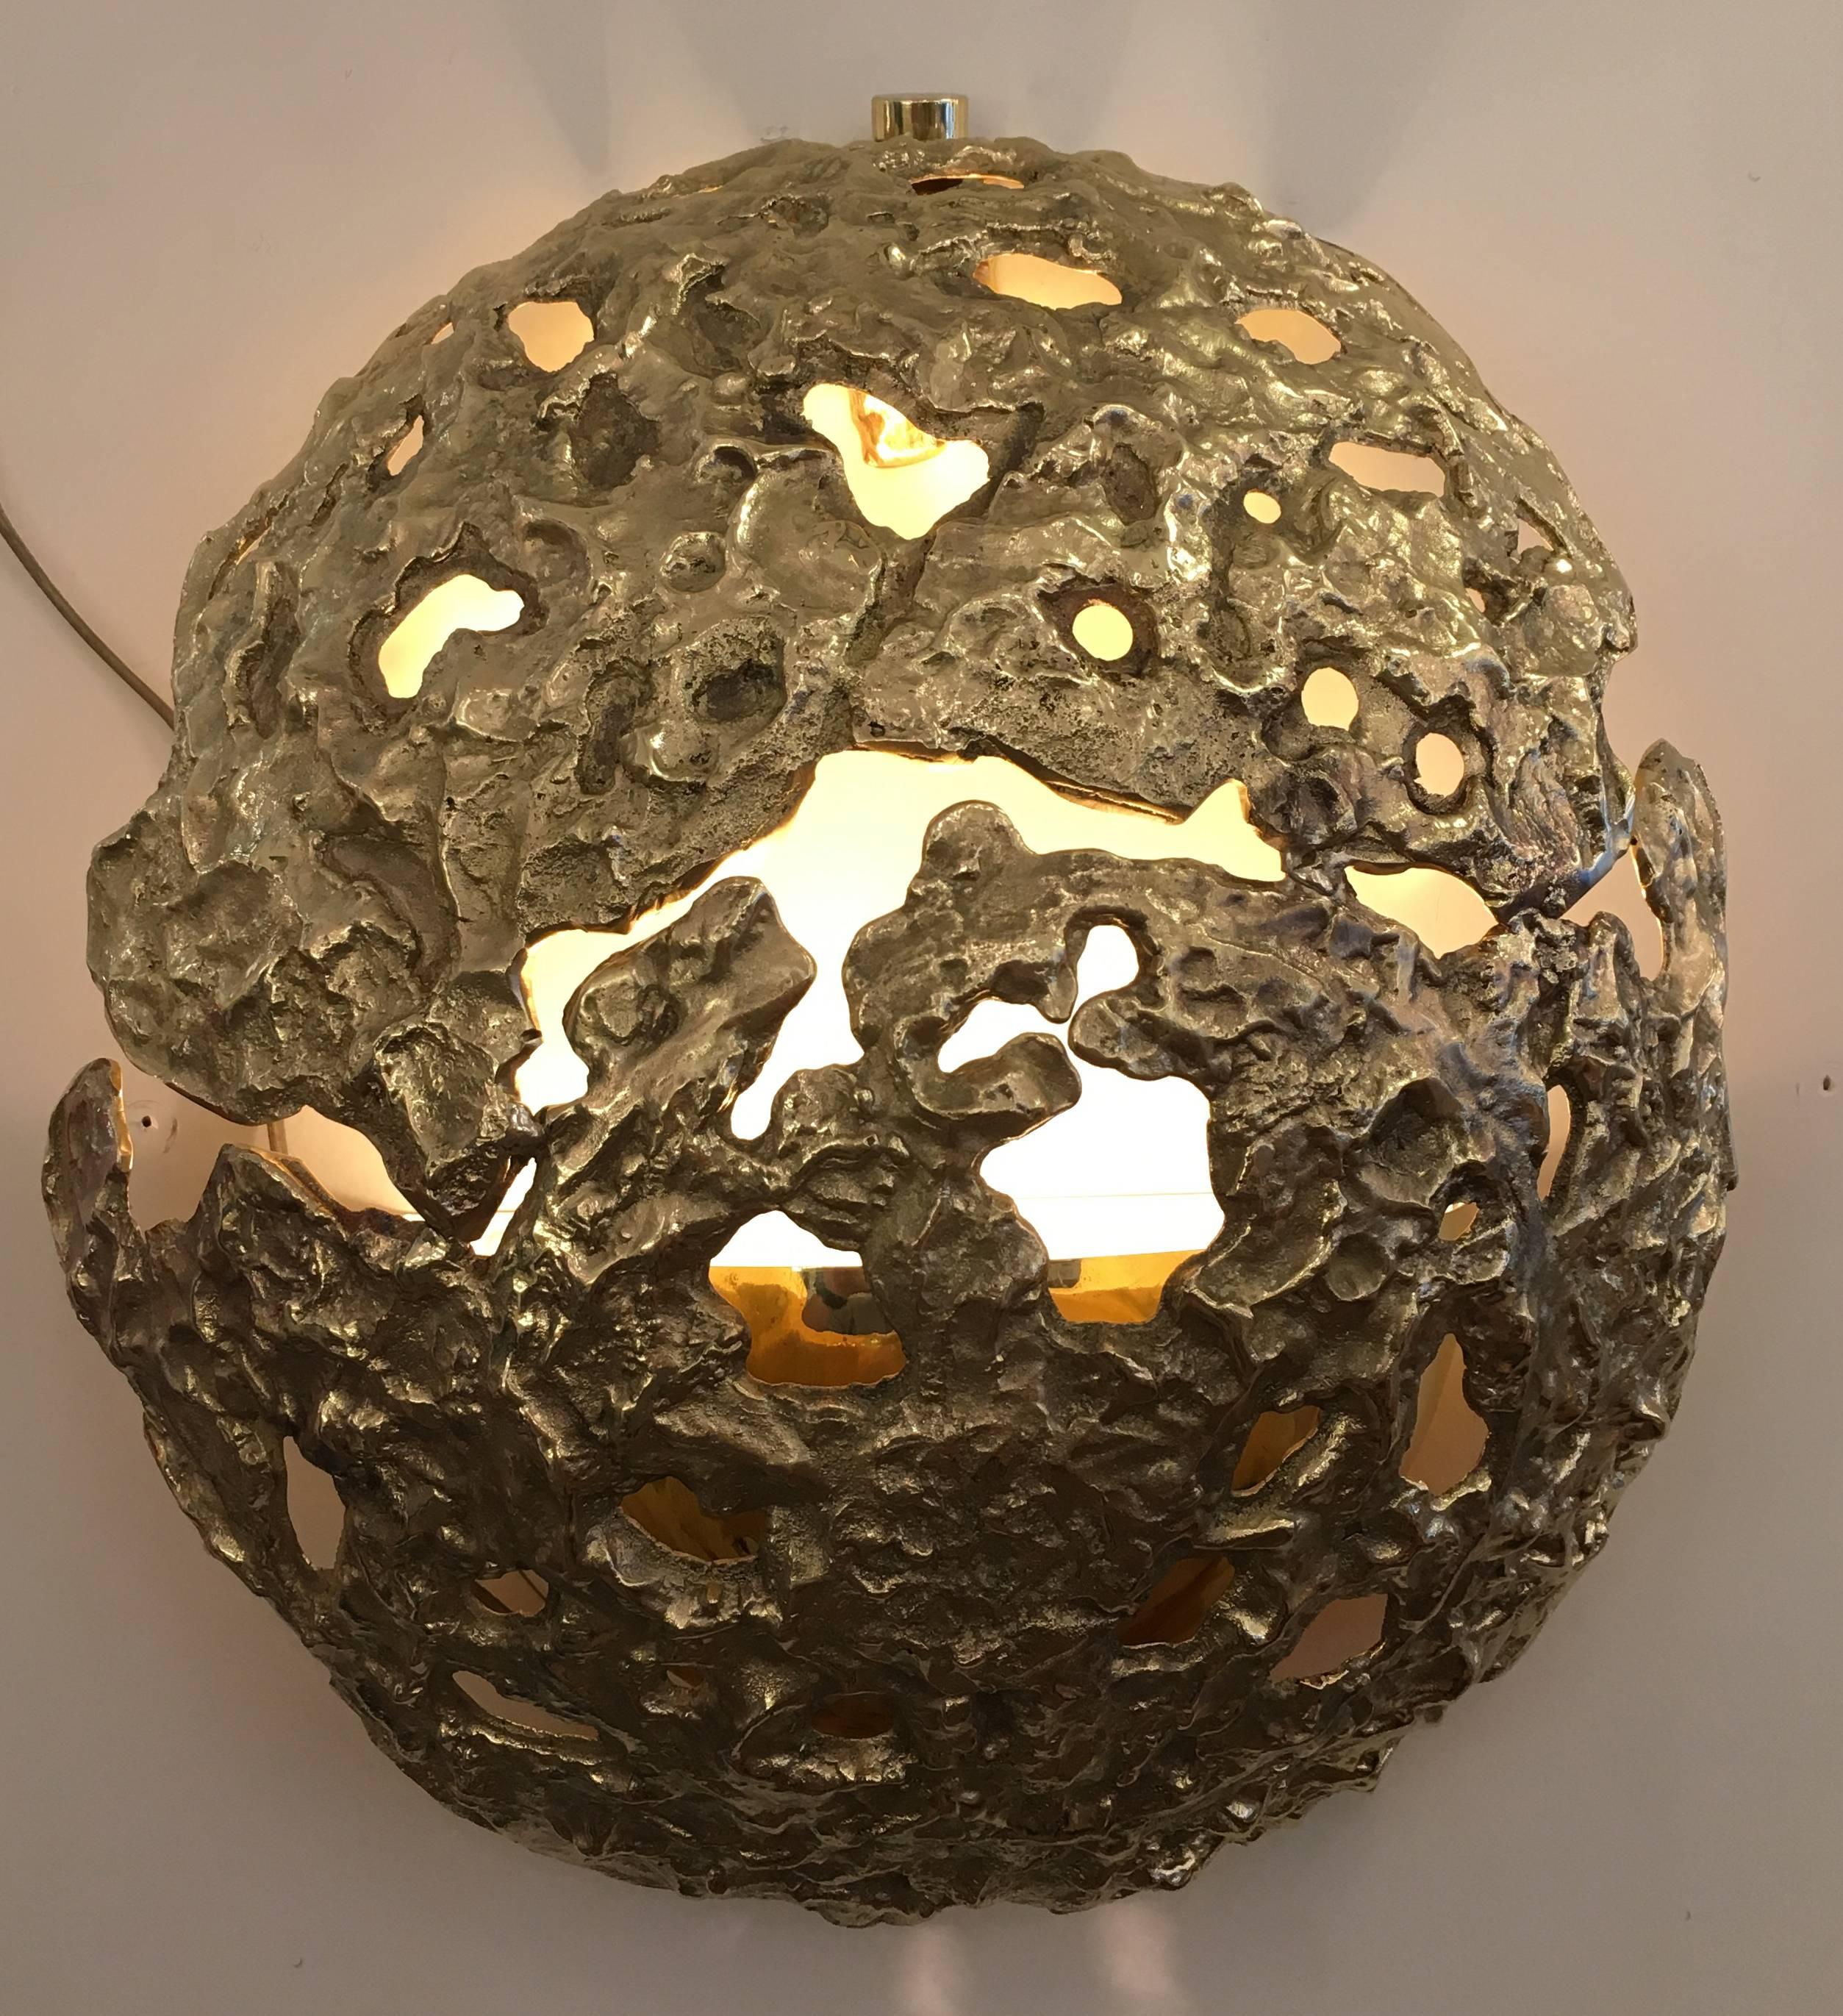 Sculptural cast bronze wall light designed by Angelo Brotto for Italian lighting company Esperia. The perforations throughout the fixtures create an enchanting light effect. Exclusively available at Gaspare Asaro-Italian Modern. Smaller version